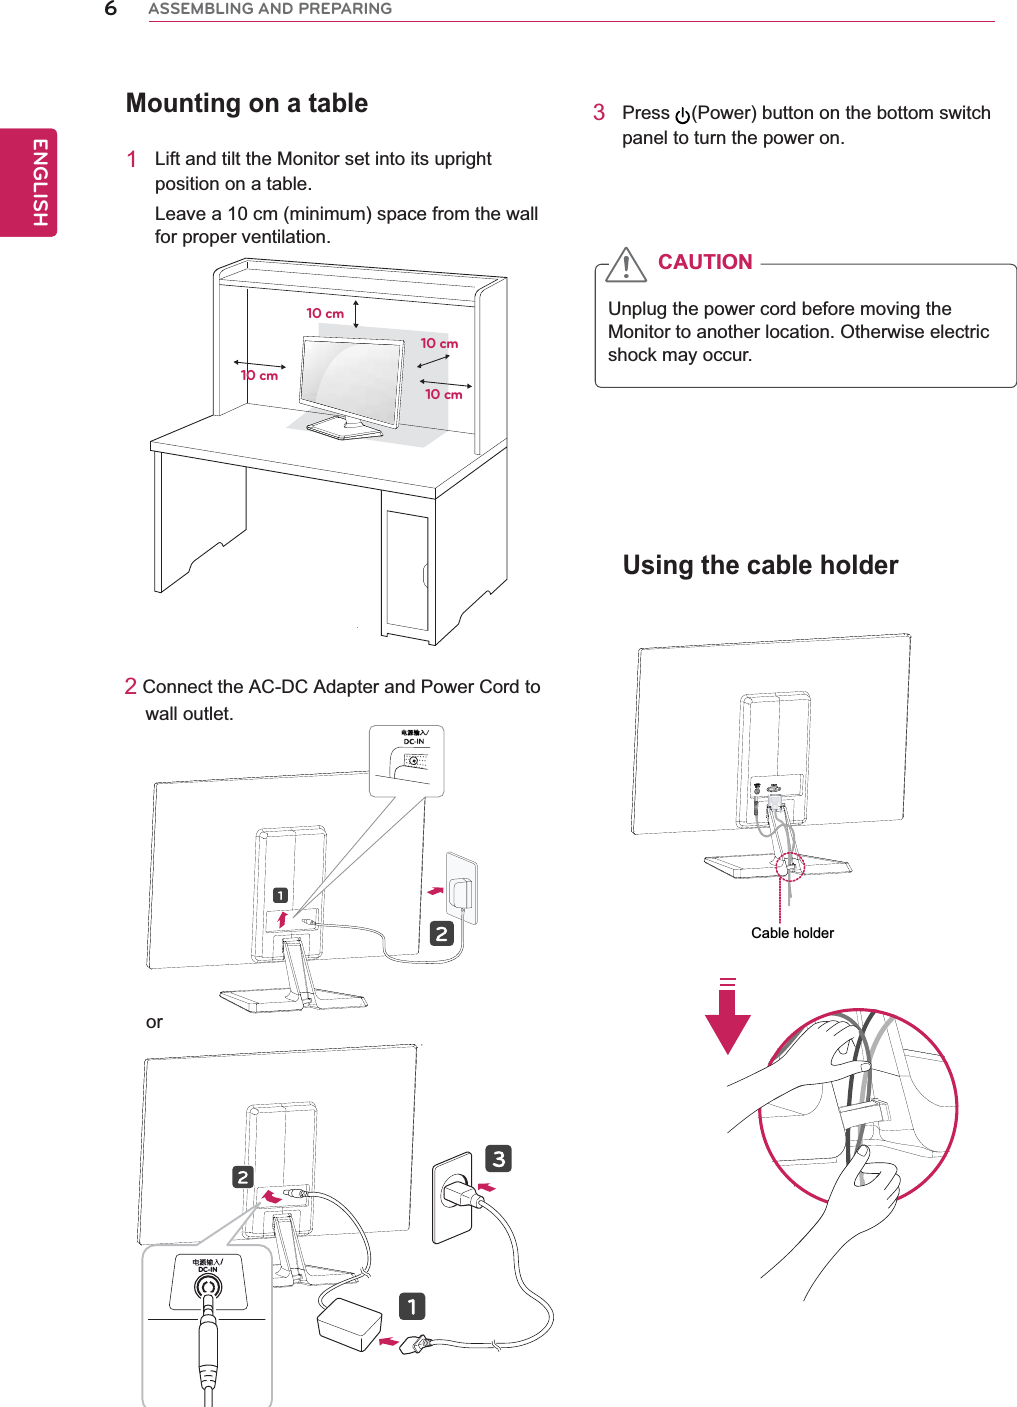 Mounting on a table1Lift and tilt the Monitor set into its upright position on a table.Leave a 10 cm (minimum) space from the wall for proper ventilation.2 Connect the AC-DC Adapter and Power Cord to     wall outlet.3Press (Power) button on the bottom switch panel to turn the power on.Unplug the power cord before moving the Monitor to another location. Otherwise electric shock may occur.CAUTION10 cm10 cm10 cm10 cmUsing the cable holder6ENGENGLISHASSEMBLING AND PREPARING⬉⑤䕧ܹDC-IN /orCable holder